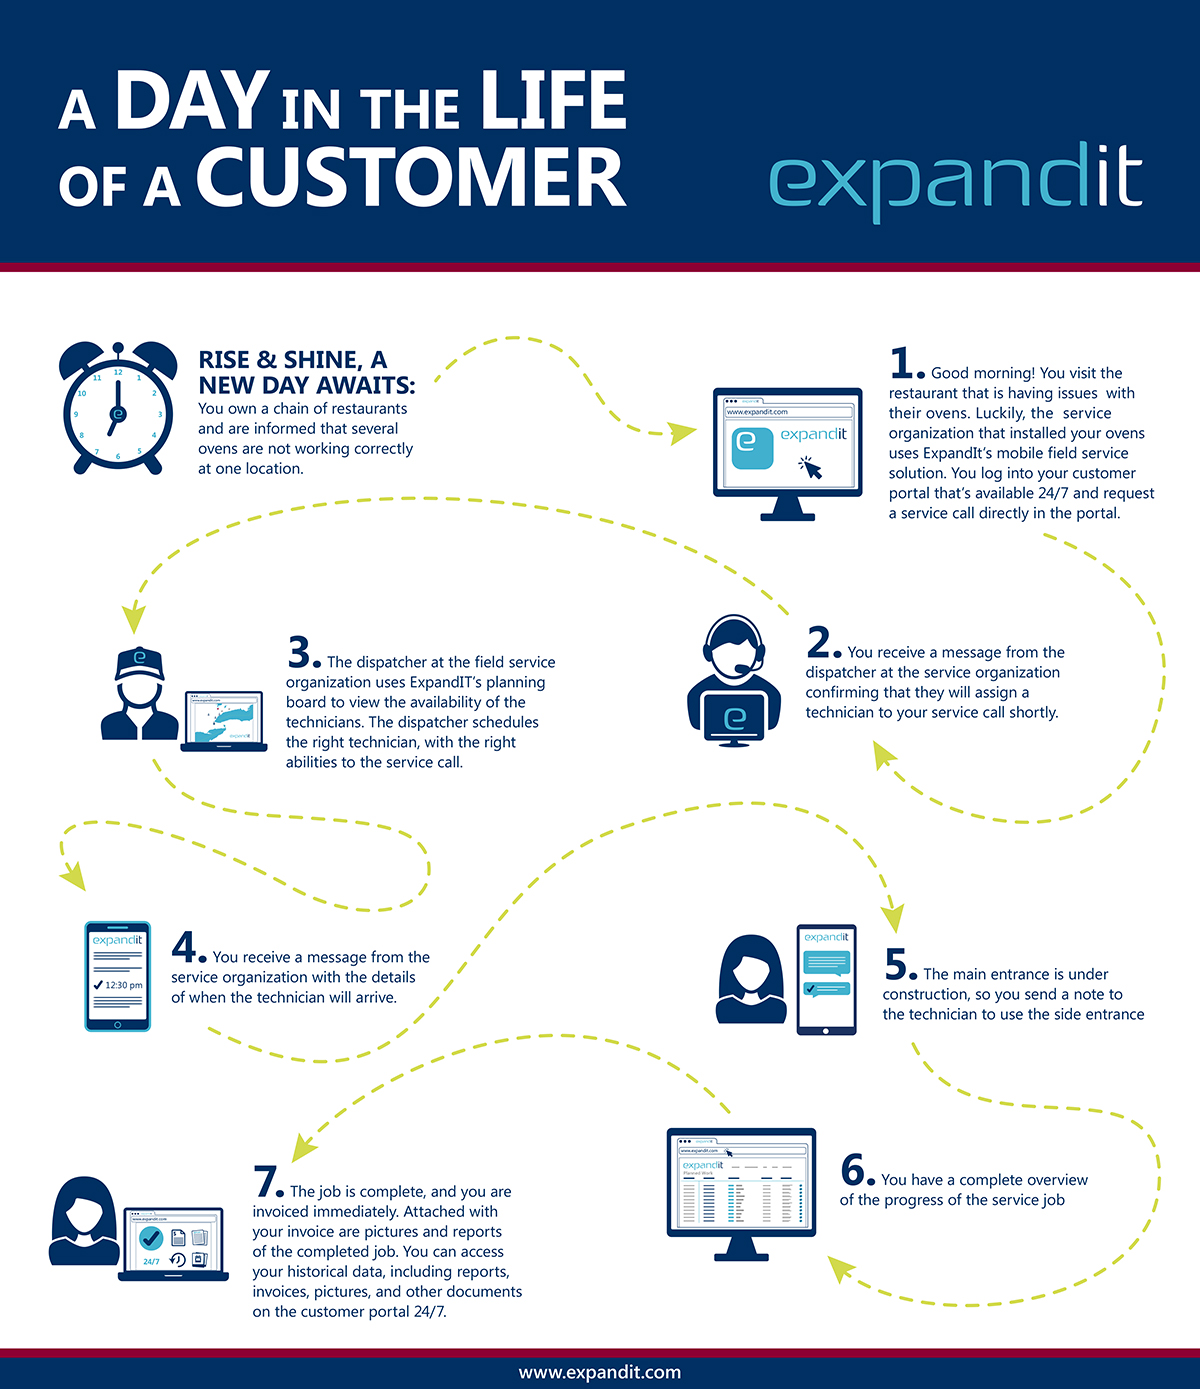 A Day in the Life of a Customer infographic